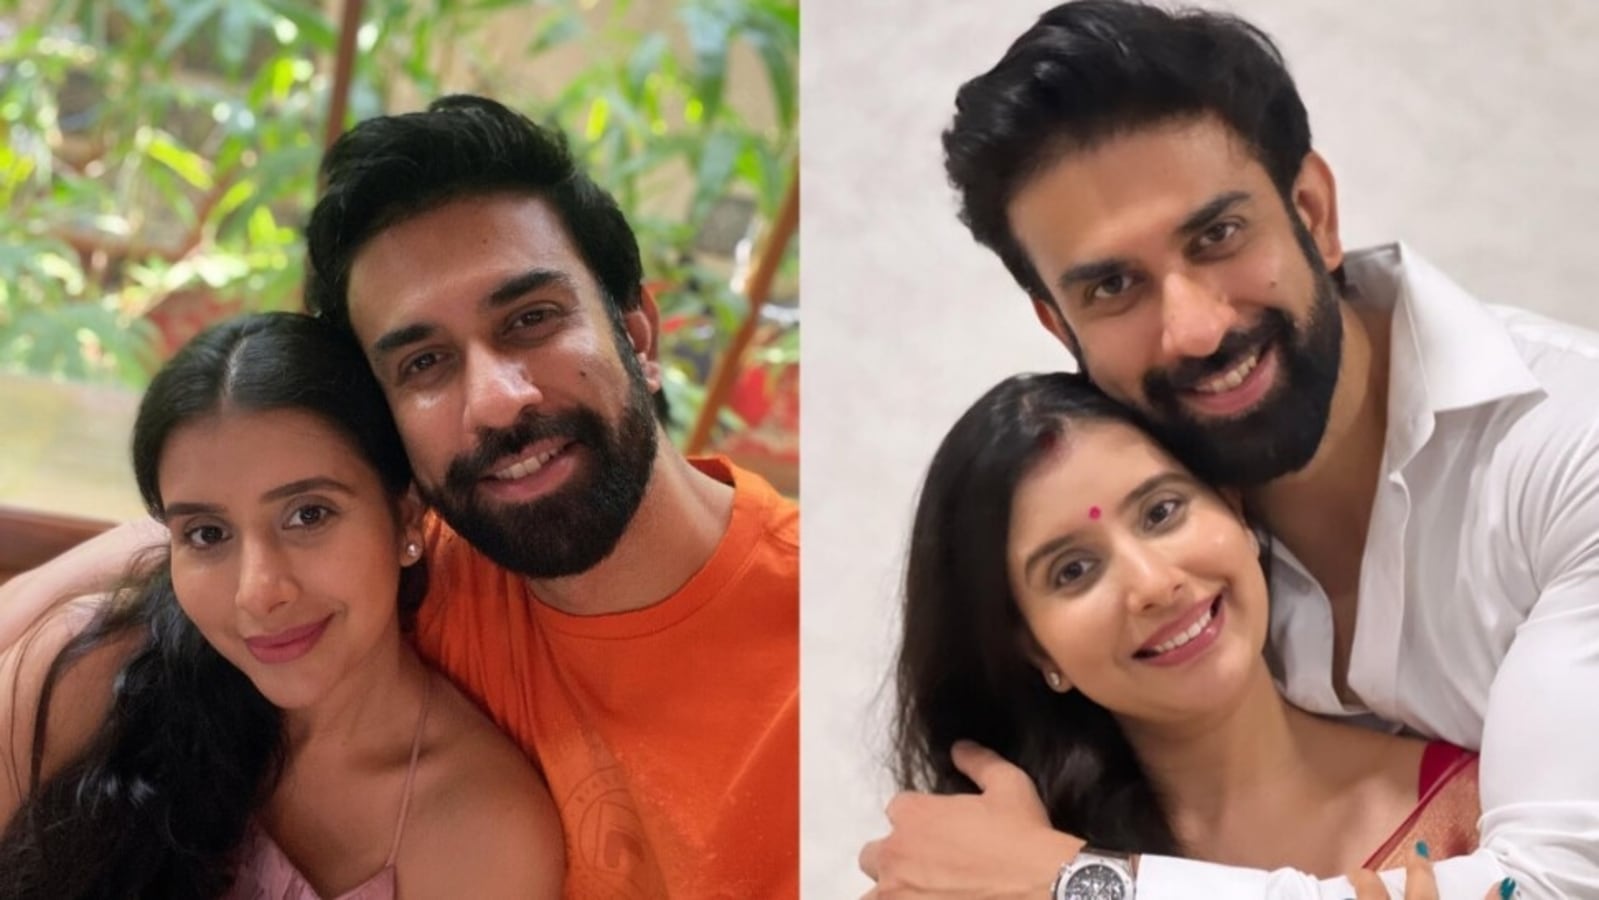 Charu Asopa is bent on getting divorce despite Rajeev Sen’s romantic posts: ‘It’s old pic, we have blocked each other’